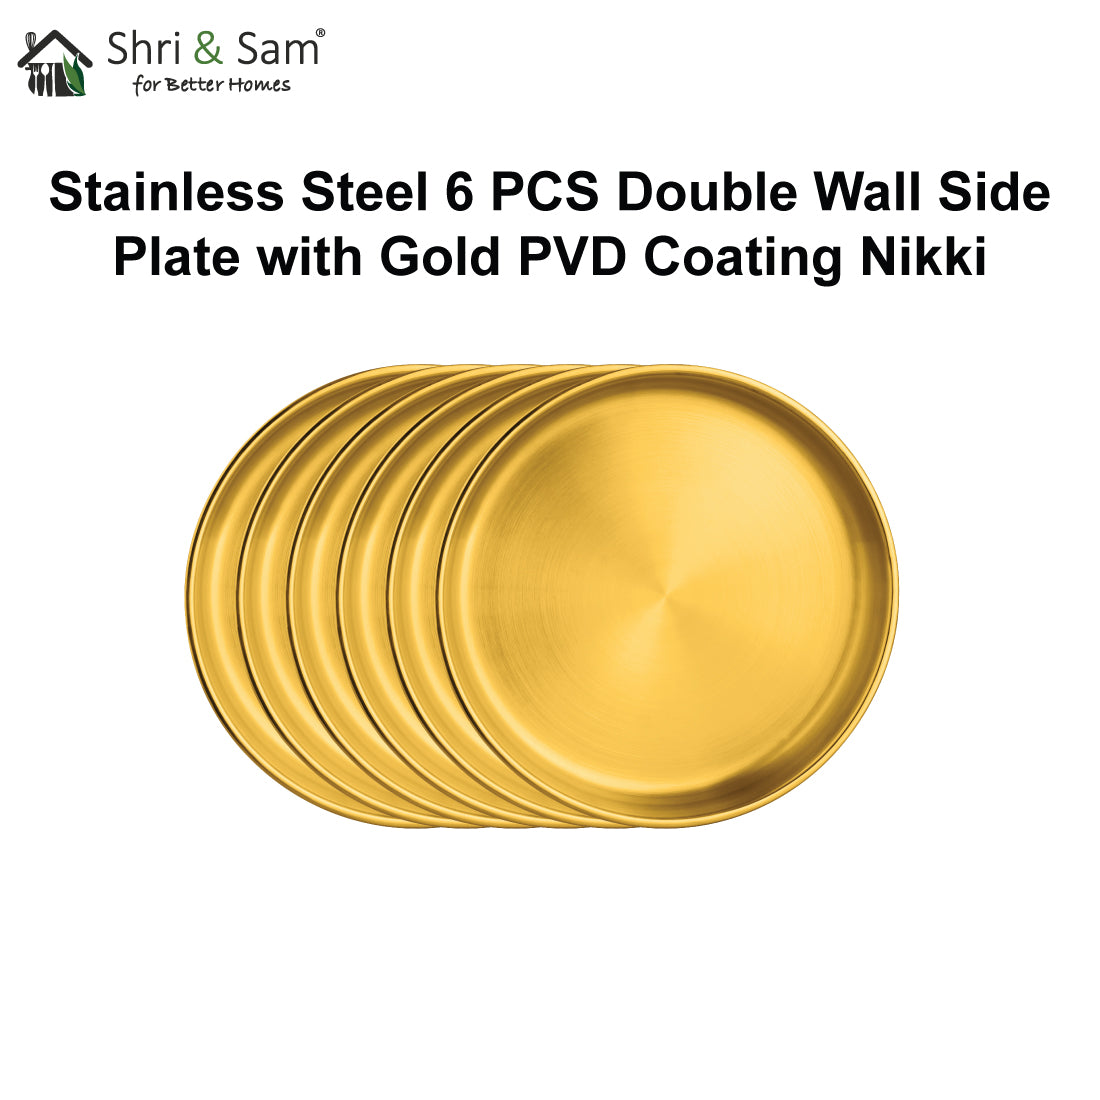 Stainless Steel 6 PCS Double Wall Side Plate with Gold PVD Coating Nikki